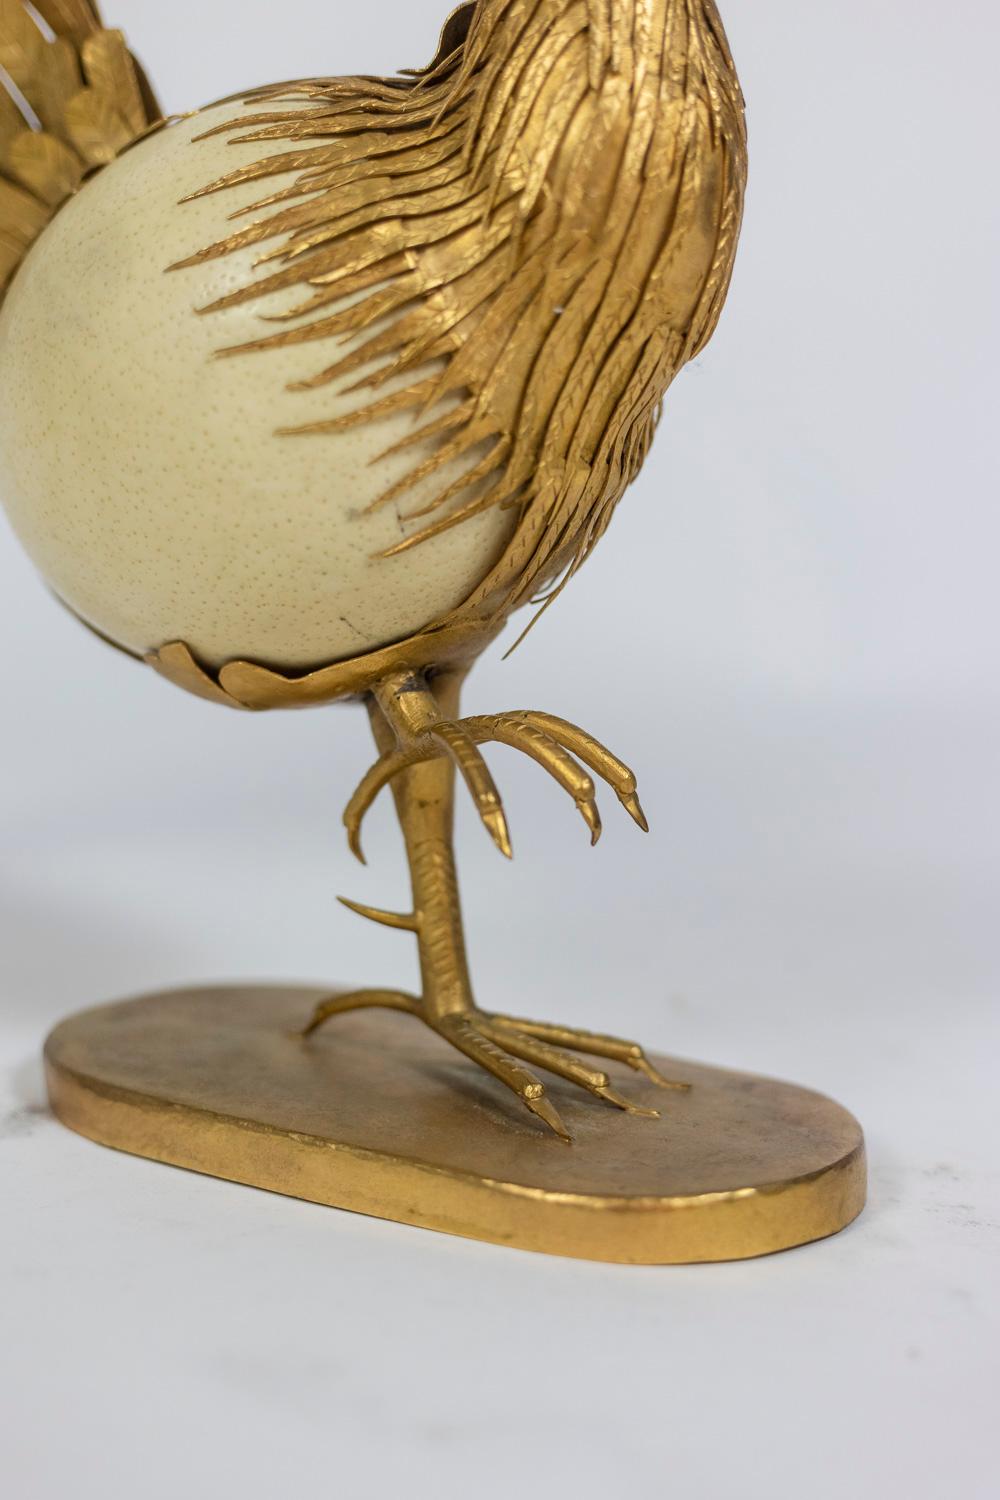 Rooster in Ostrich Egg and Golden Brass, 1970s For Sale 6